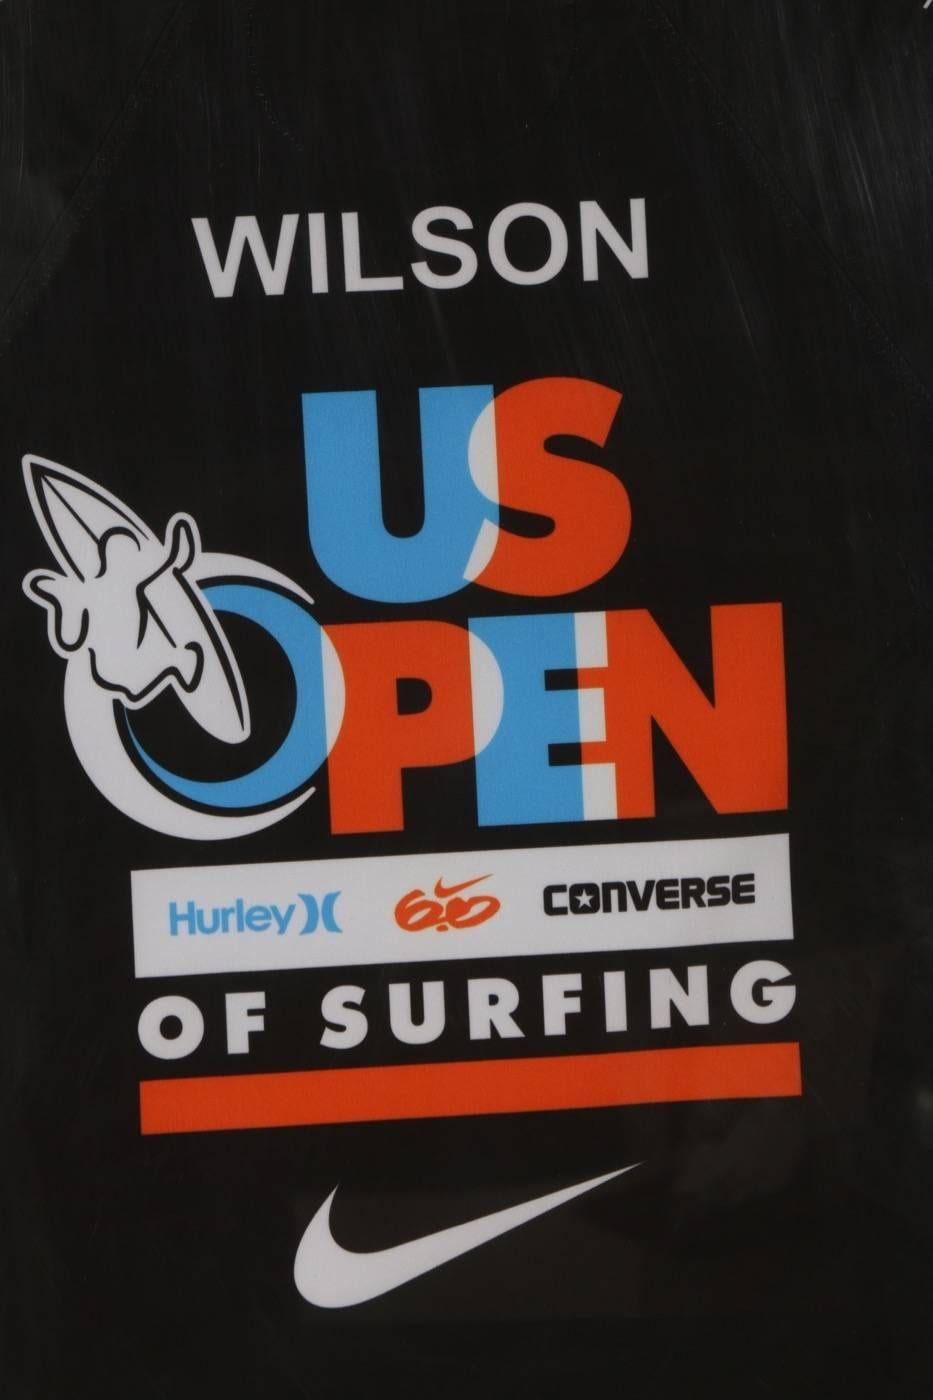 Julian Wilson US Open Surf Competition team Rash Guard Jersey.
Promotional rash guard jersey made by Nike for Julian Wilson, US Open of Surfing, Wilson was the 1st place winner of this competition in 2012. 

Only a couple of these garments were ever